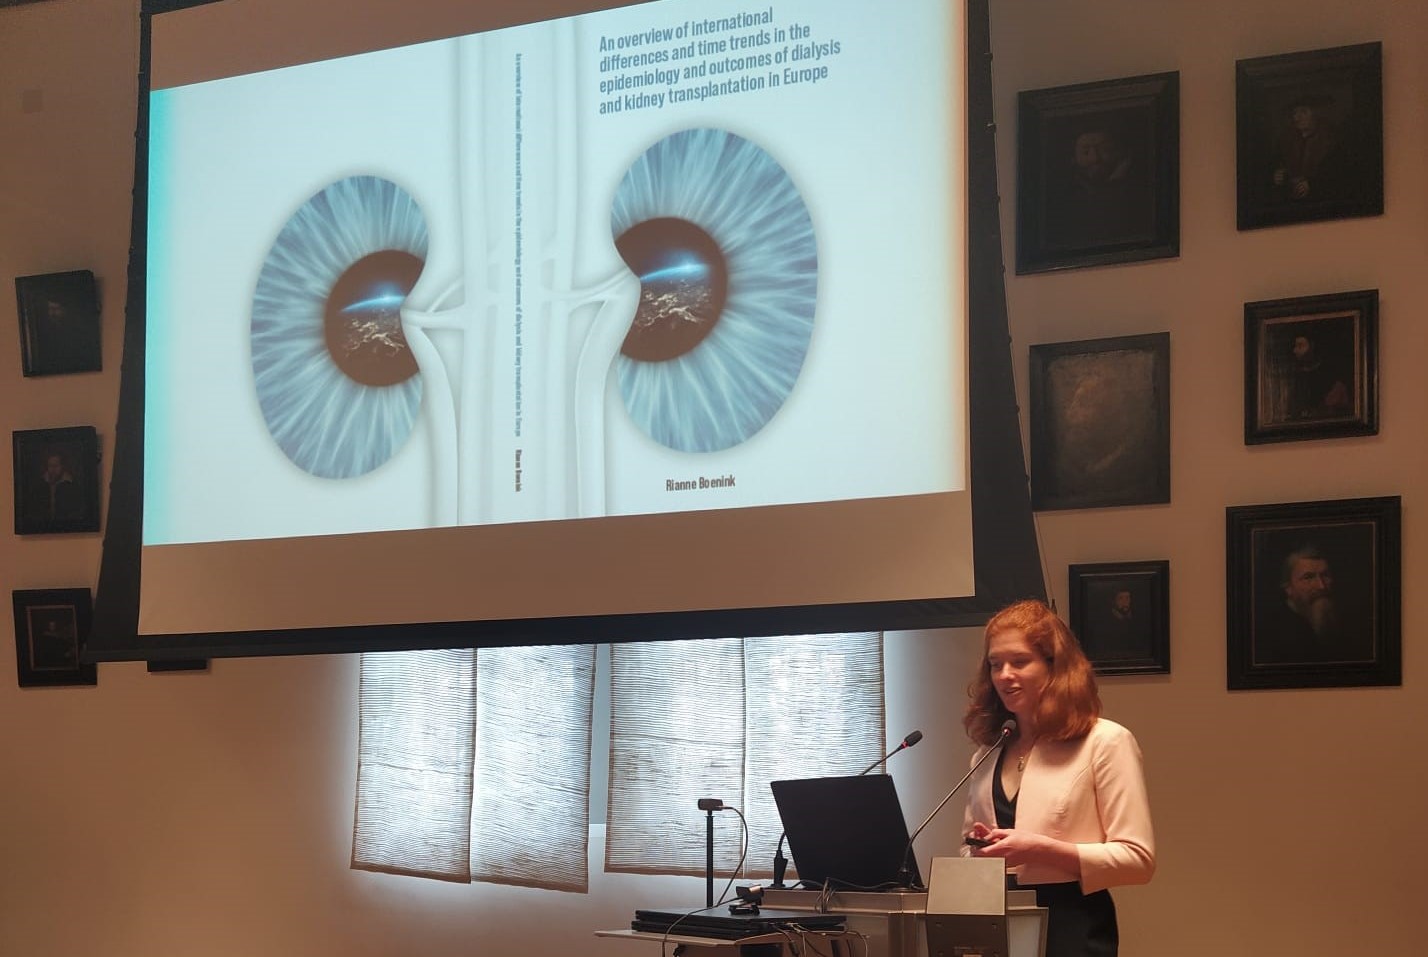 PhD Defense: Overview of dialysis and kidney transplant epidemiology in Europe